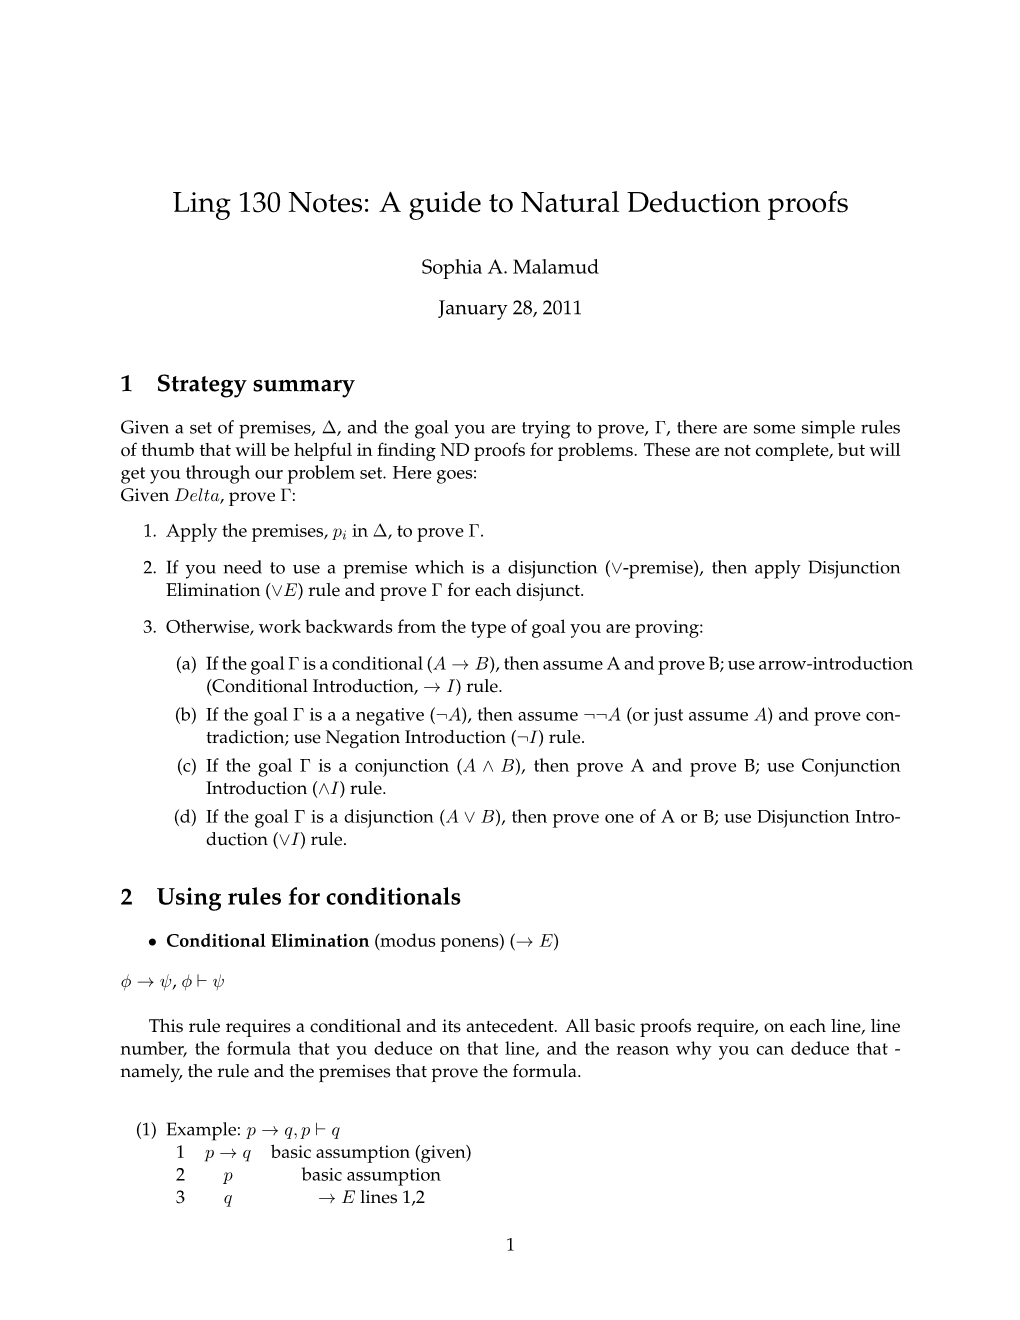 Ling 130 Notes: a Guide to Natural Deduction Proofs